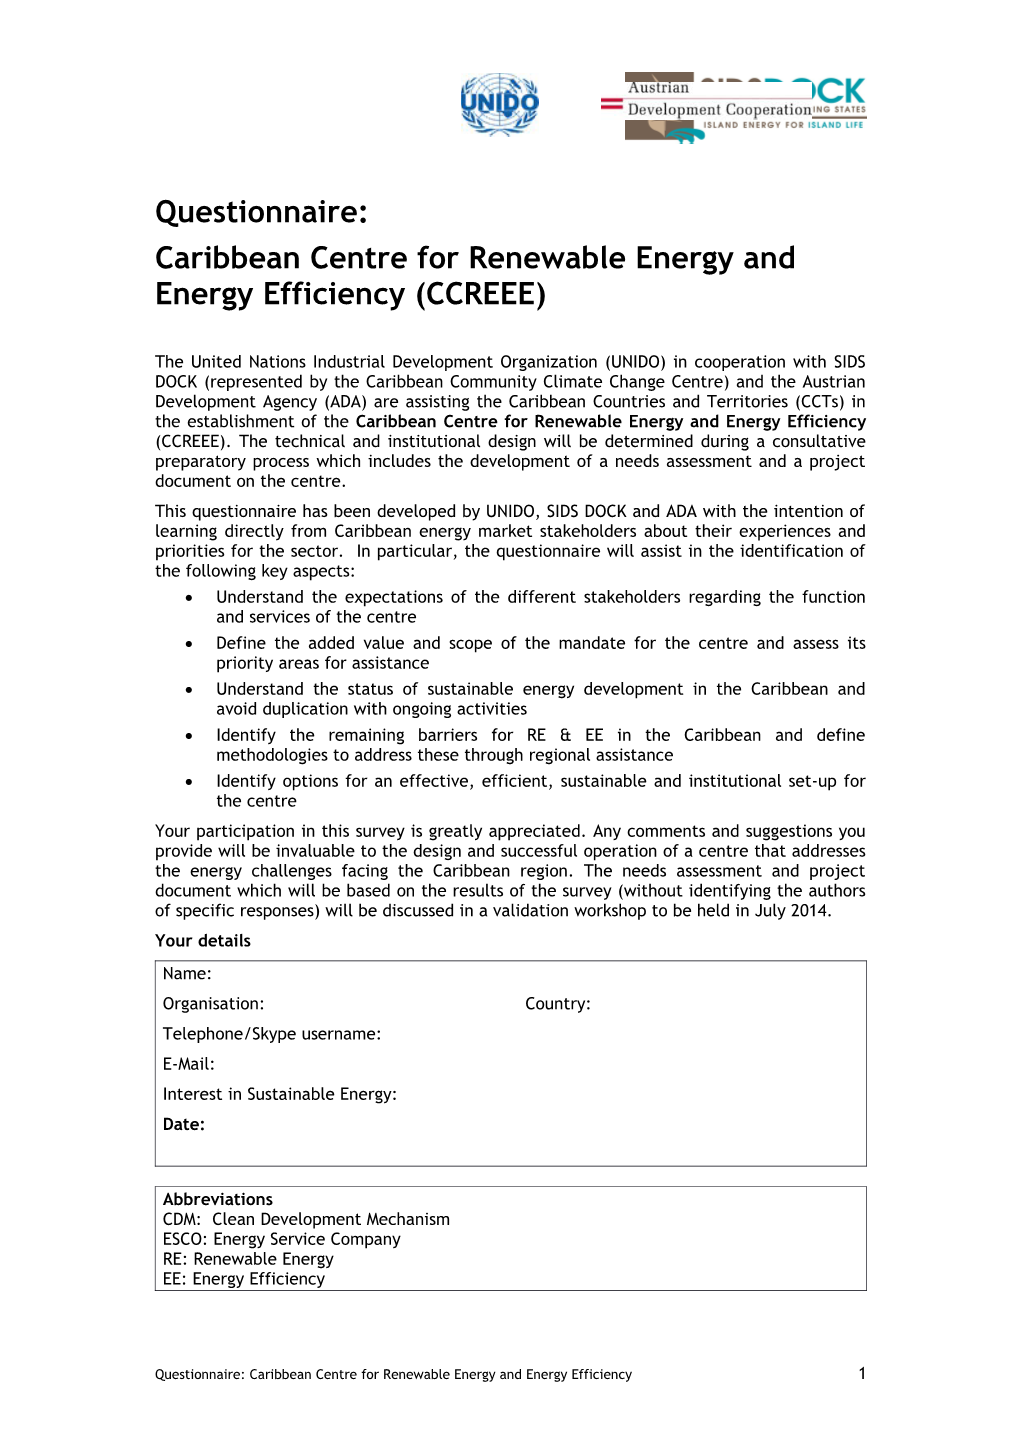 Caribbean Centre for Renewable Energy and Energy Efficiency (CCREEE)